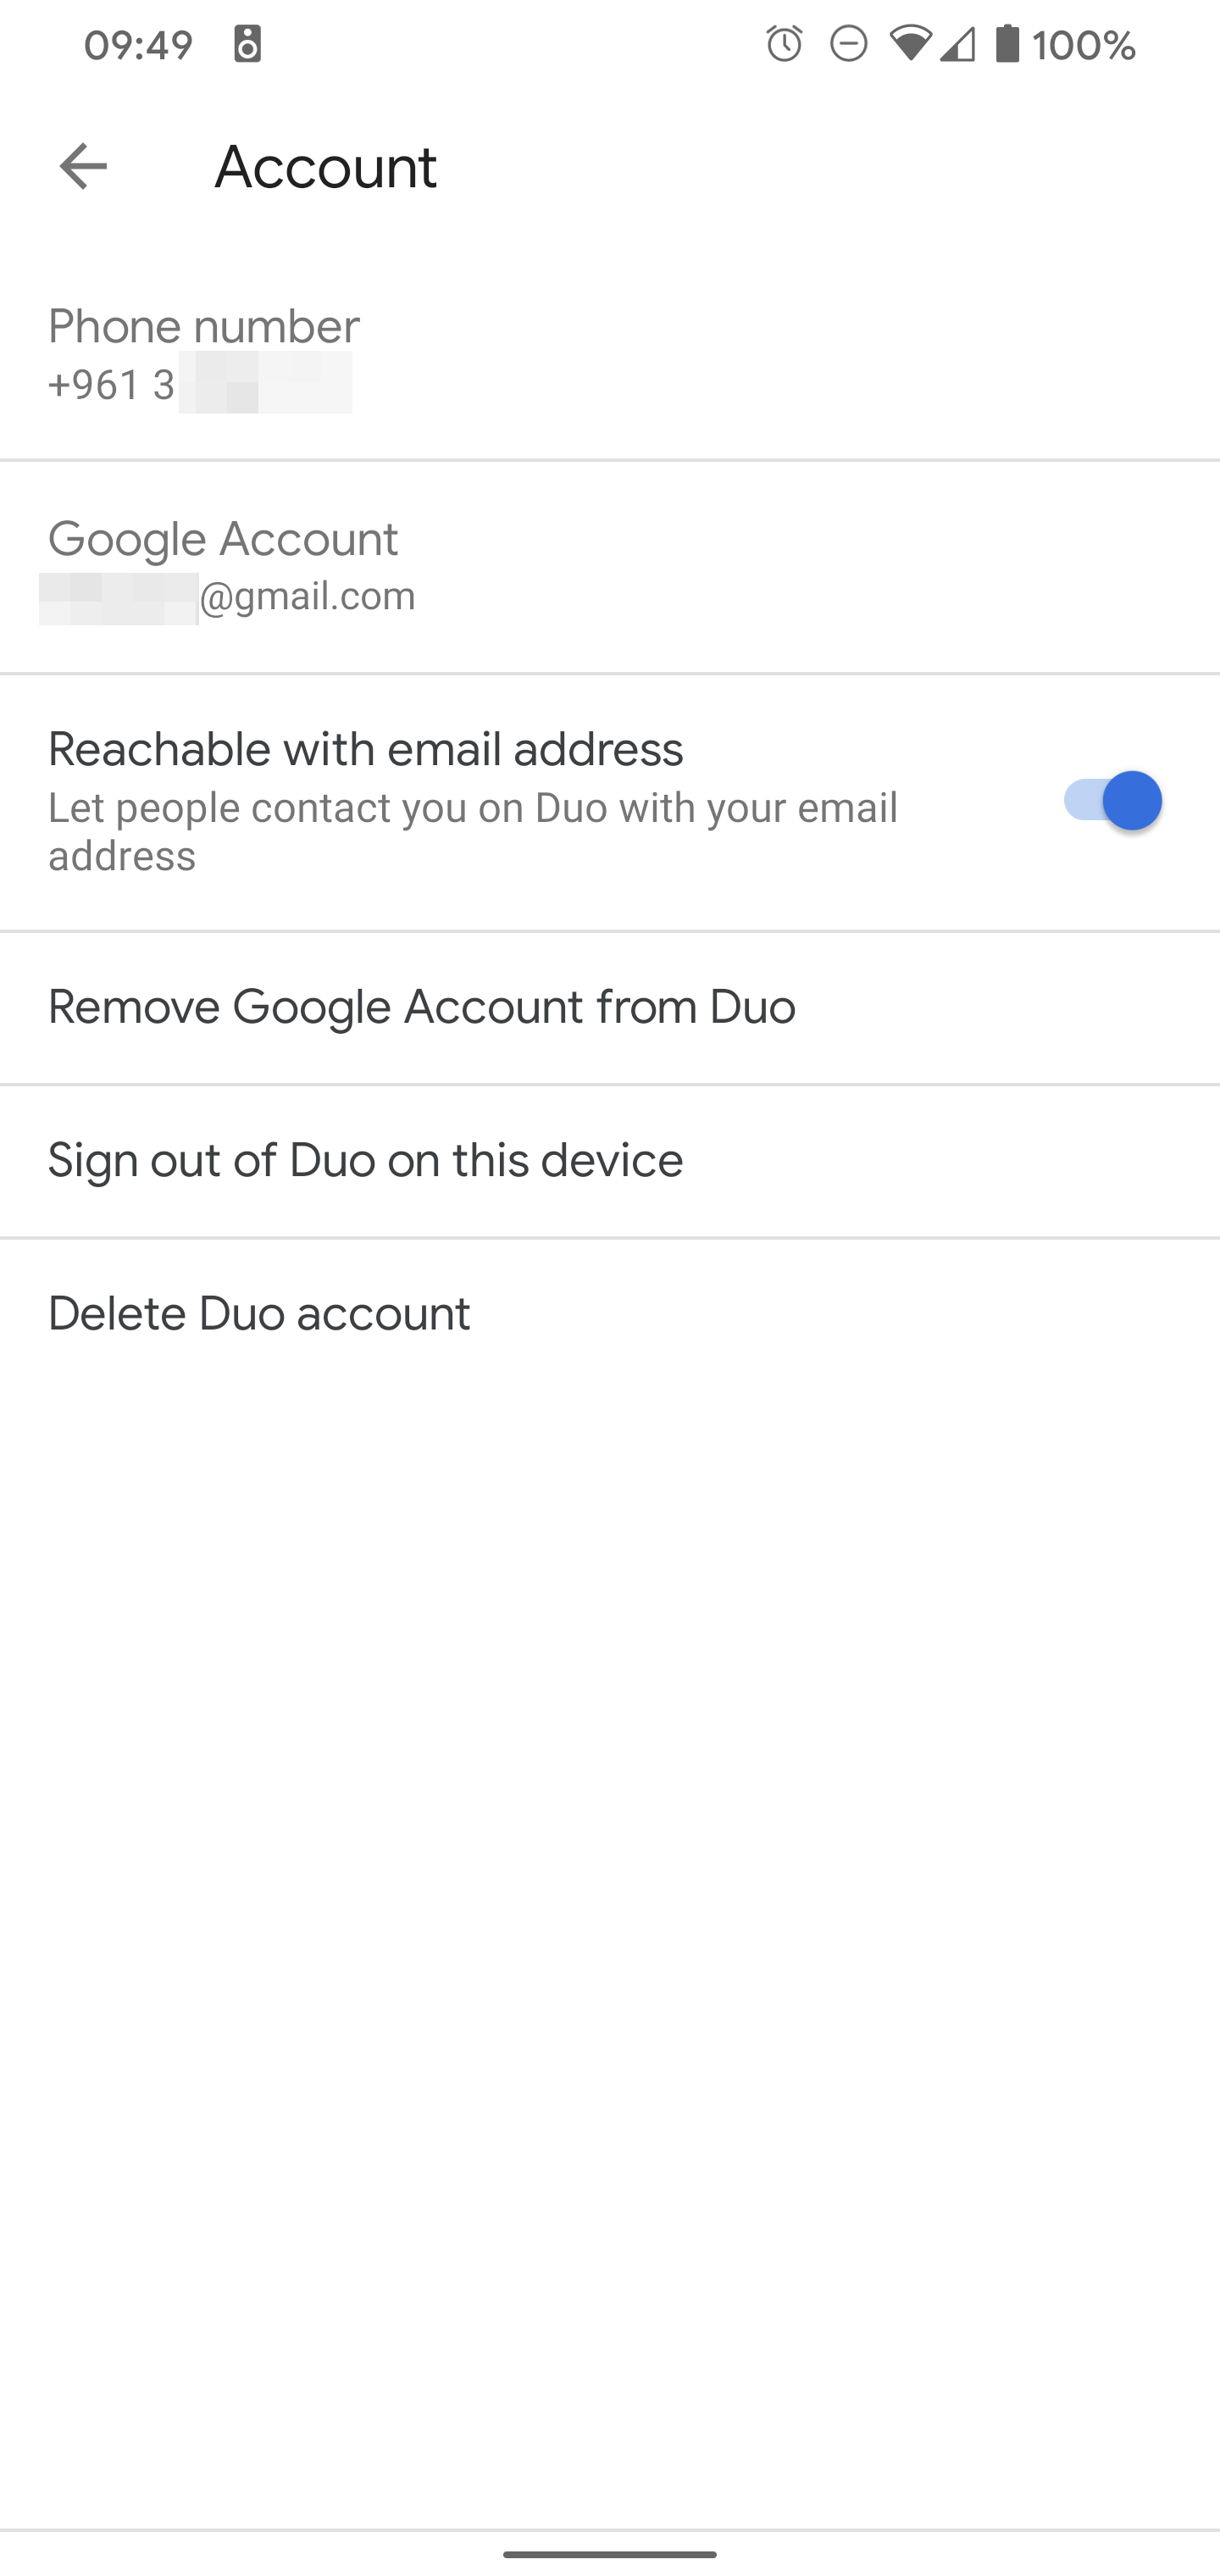 20200601.Google-Duo-for-Android-prepares-to-support-calls-without-a-phone-number-02.png